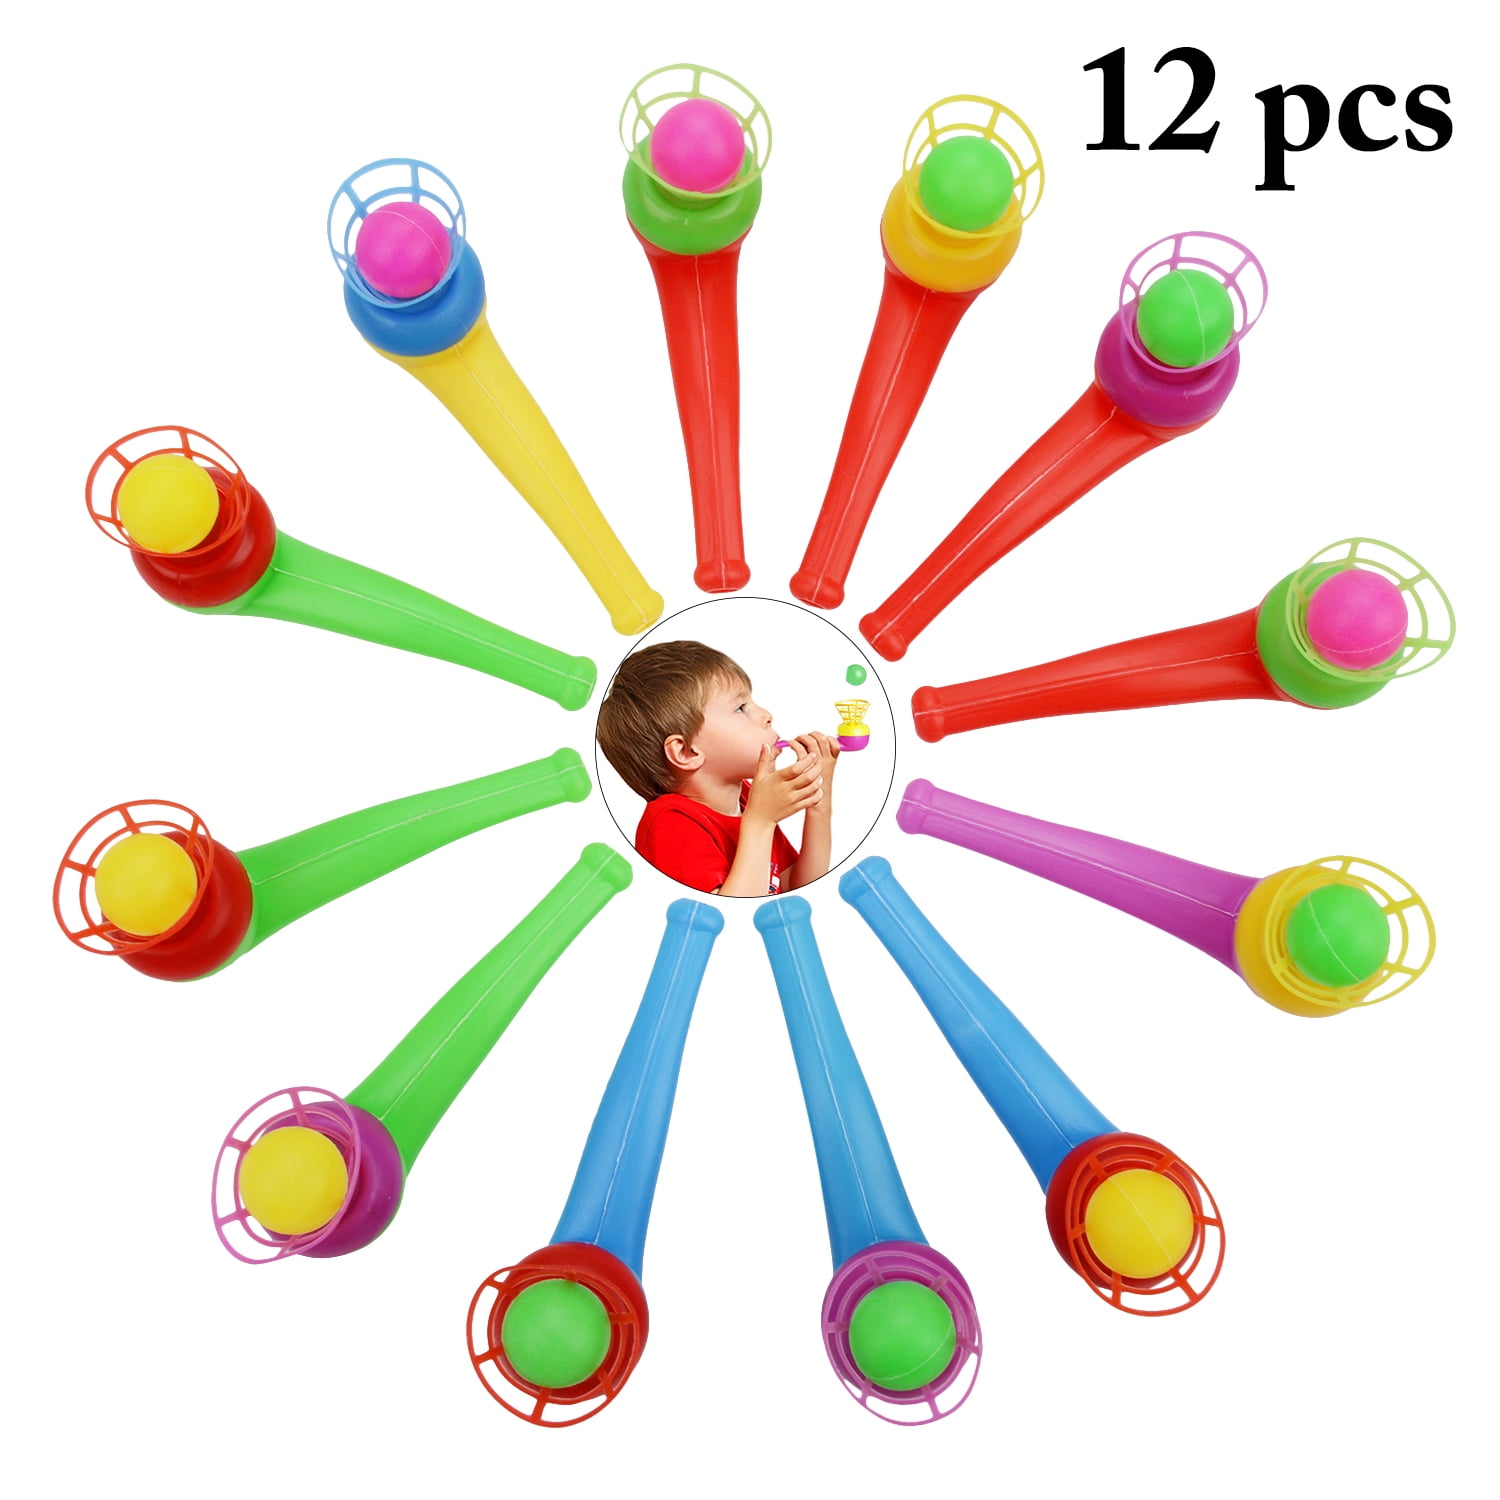 1pc Colorful Magic Floating BlowPipe Balls Toys For Kids Gift Party Favor Game 